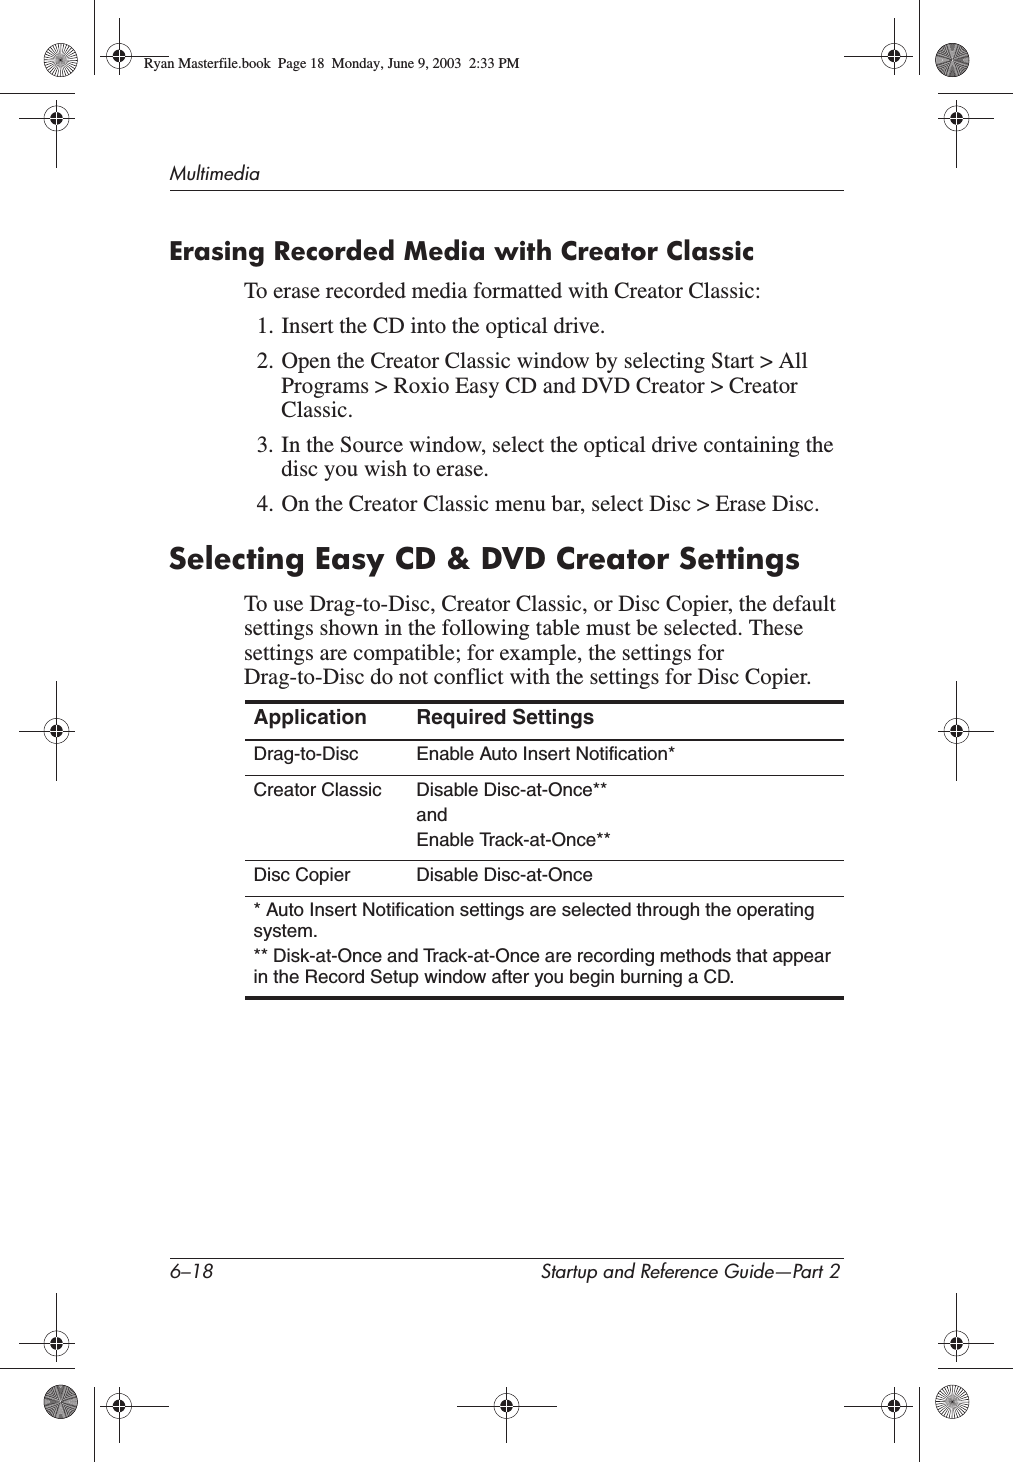 6–18 Startup and Reference Guide—Part 2MultimediaErasing Recorded Media with Creator ClassicTo erase recorded media formatted with Creator Classic:1. Insert the CD into the optical drive.2. Open the Creator Classic window by selecting Start &gt; All Programs &gt; Roxio Easy CD and DVD Creator &gt; Creator Classic.3. In the Source window, select the optical drive containing the disc you wish to erase.4. On the Creator Classic menu bar, select Disc &gt; Erase Disc.Selecting Easy CD &amp; DVD Creator SettingsTo use Drag-to-Disc, Creator Classic, or Disc Copier, the default settings shown in the following table must be selected. These settings are compatible; for example, the settings for Drag-to-Disc do not conflict with the settings for Disc Copier.Application Required SettingsDrag-to-Disc Enable Auto Insert Notification*Creator Classic Disable Disc-at-Once**andEnable Track-at-Once**Disc Copier Disable Disc-at-Once* Auto Insert Notification settings are selected through the operating system.** Disk-at-Once and Track-at-Once are recording methods that appear in the Record Setup window after you begin burning a CD.Ryan Masterfile.book  Page 18  Monday, June 9, 2003  2:33 PM